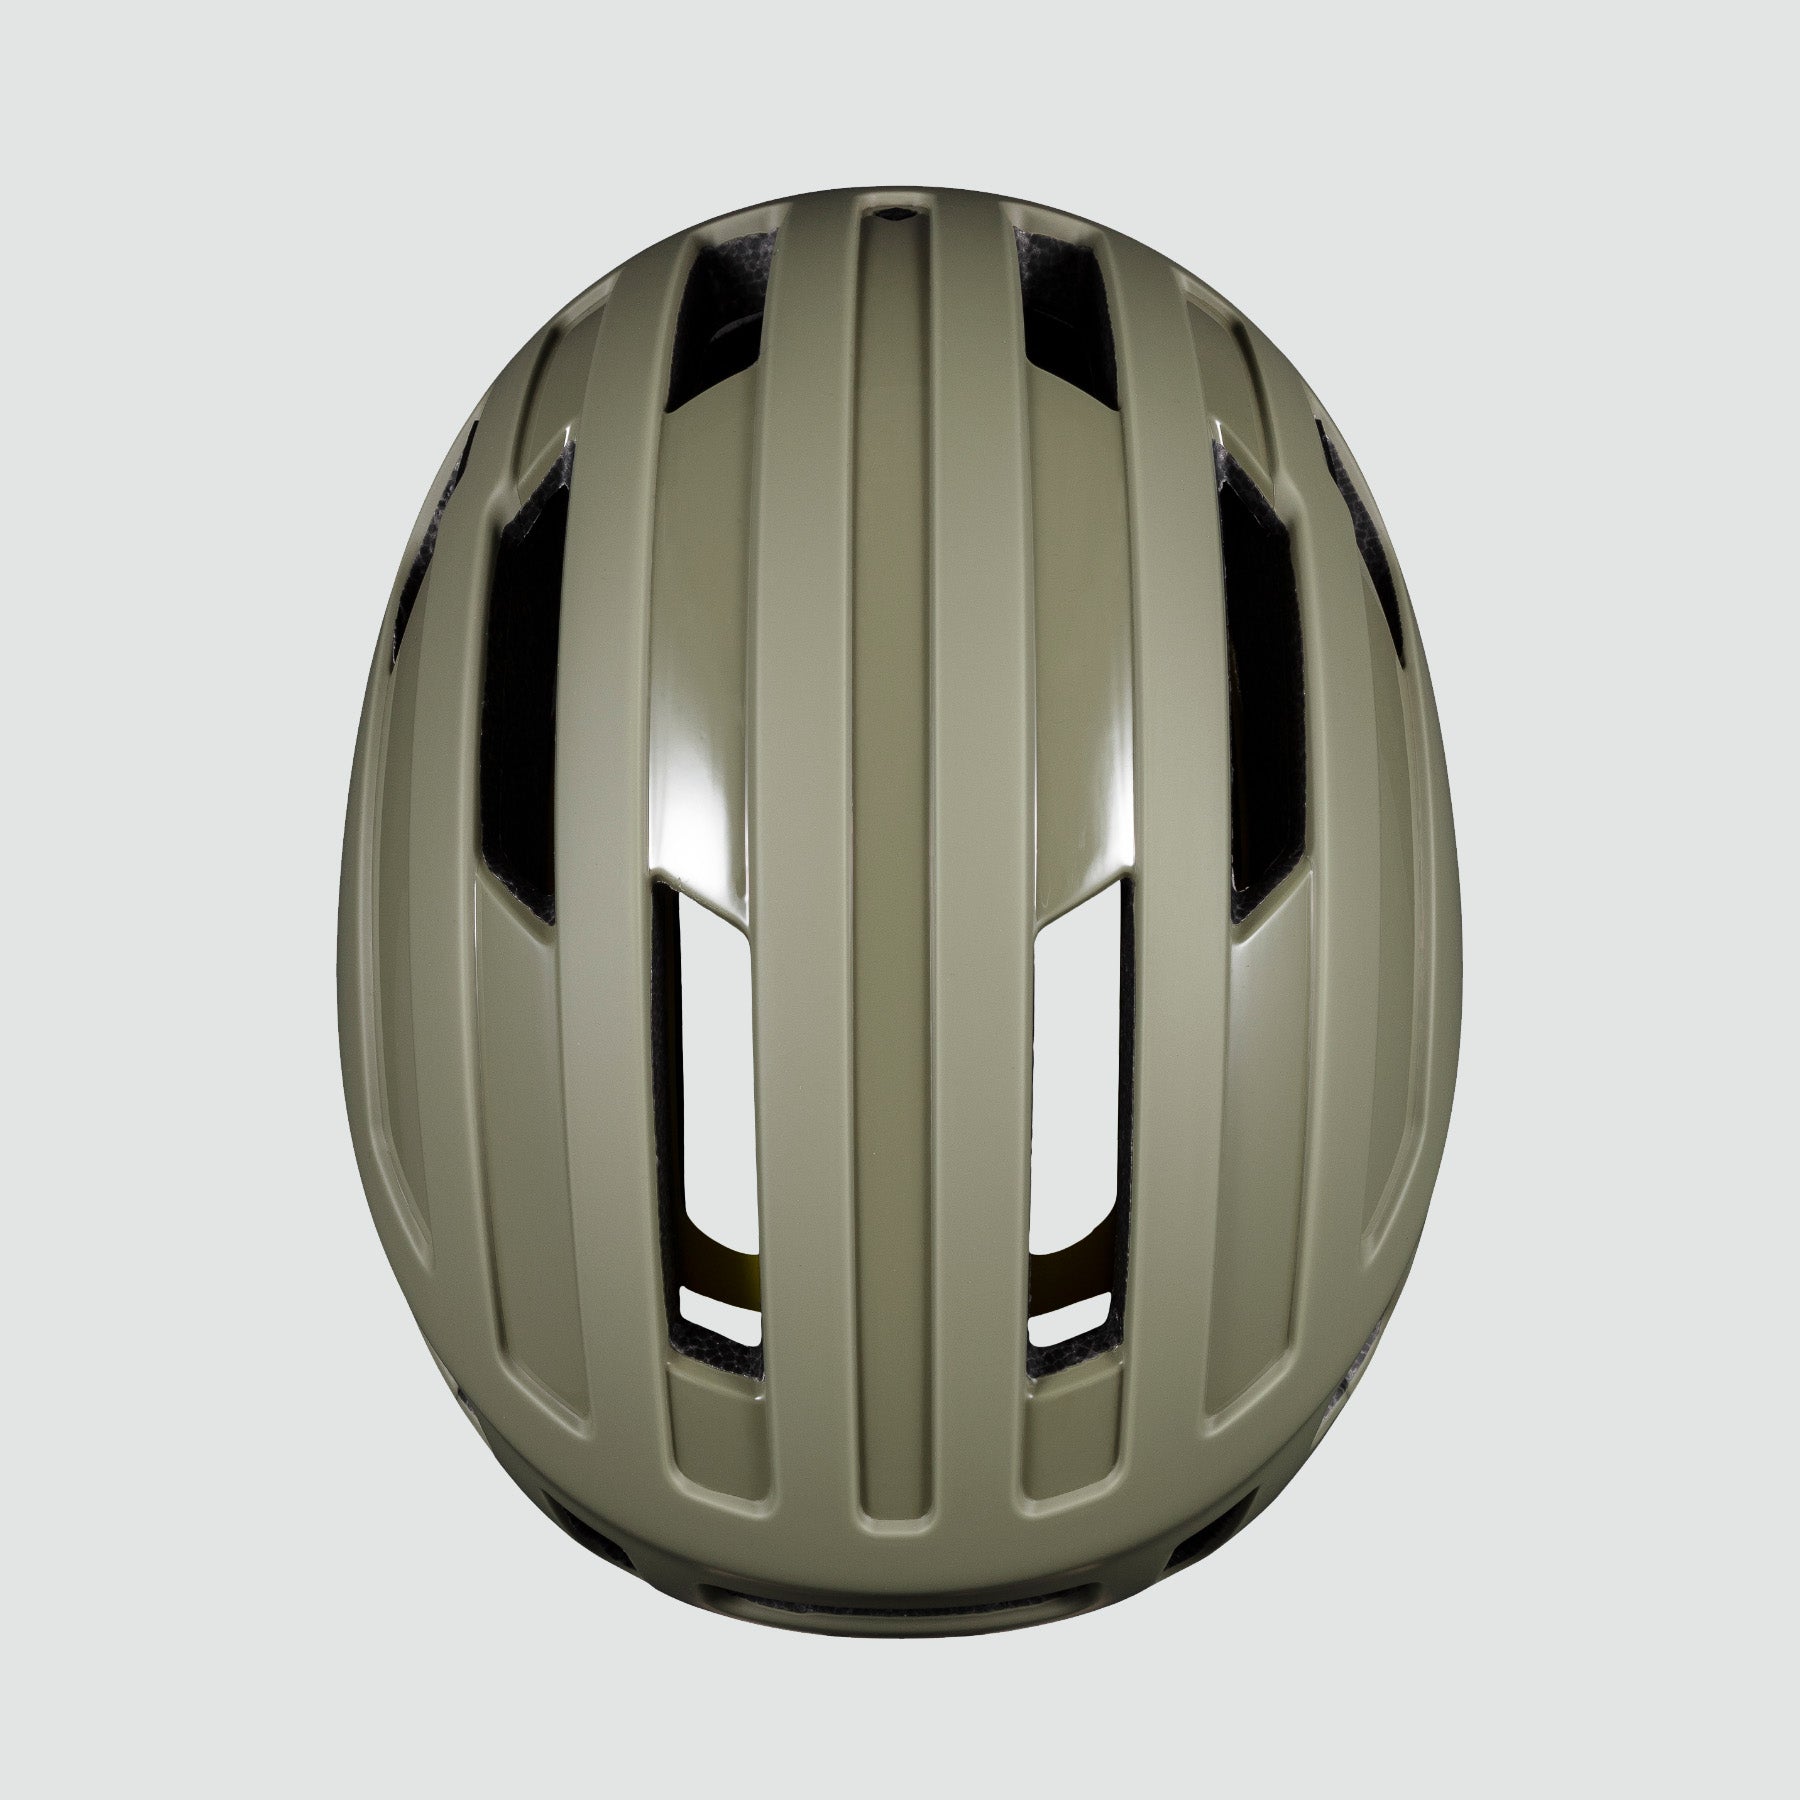 Casque Outrider Mips - Woodland